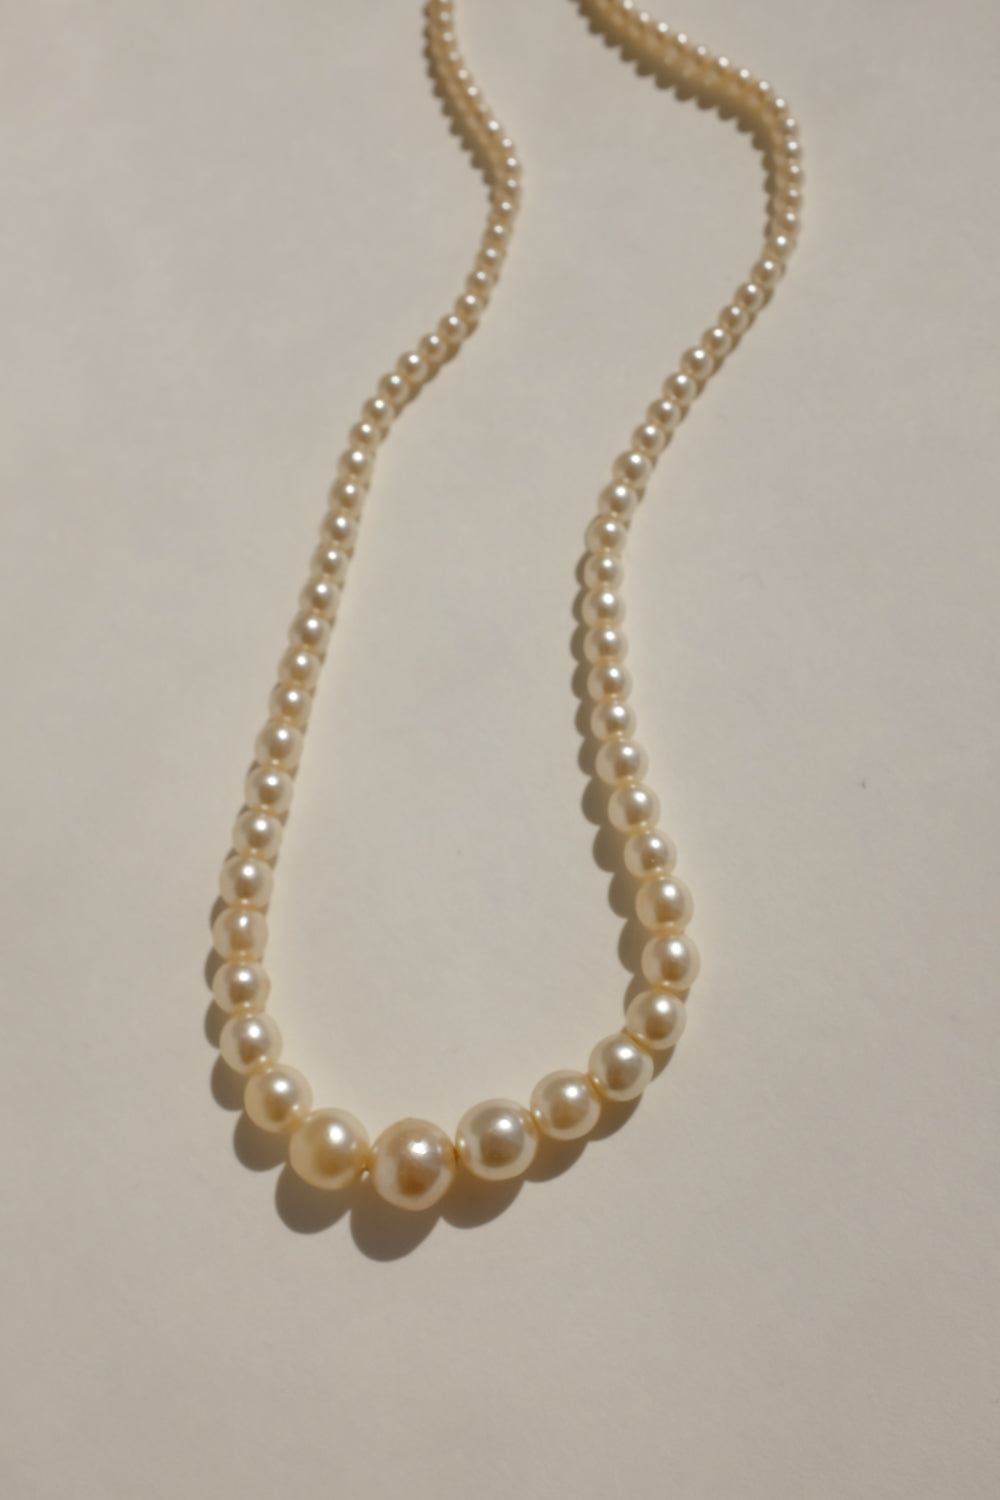 MOTHER OF PEARL VINTAGE NECKLACE